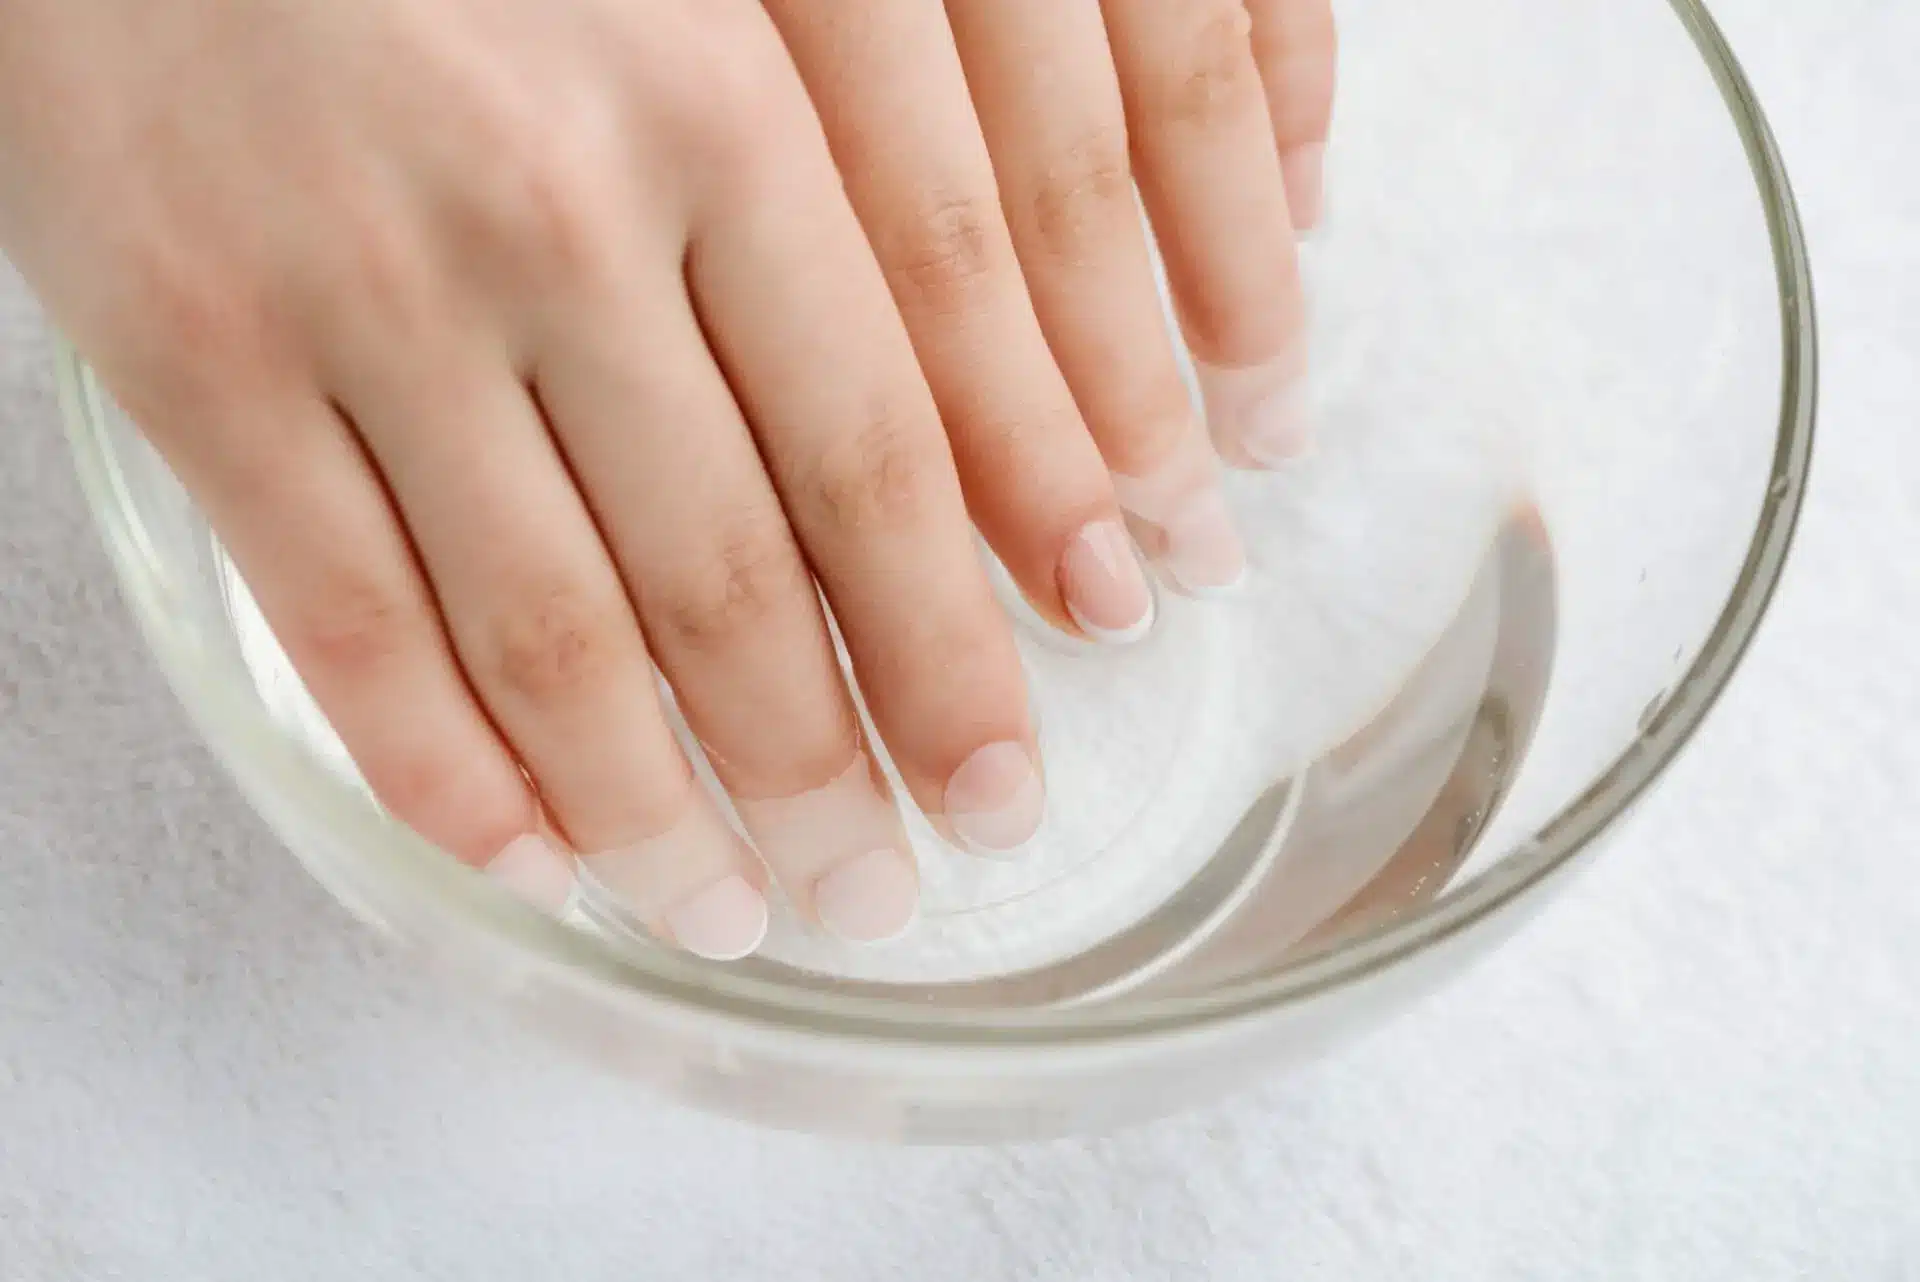 7 Benefits Of Rubbing Your Nails Together